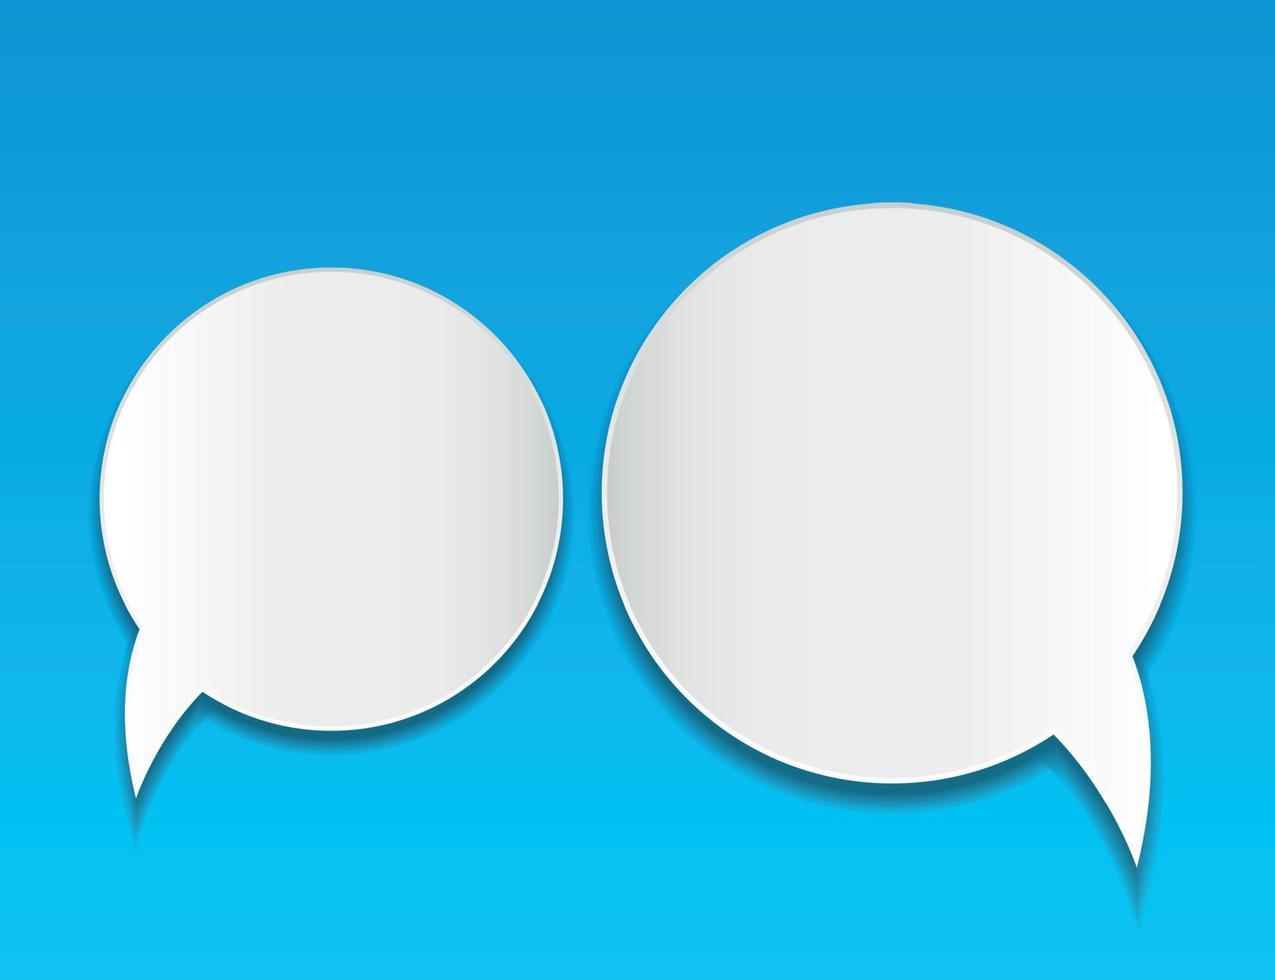 Abstract speech bubble vector background